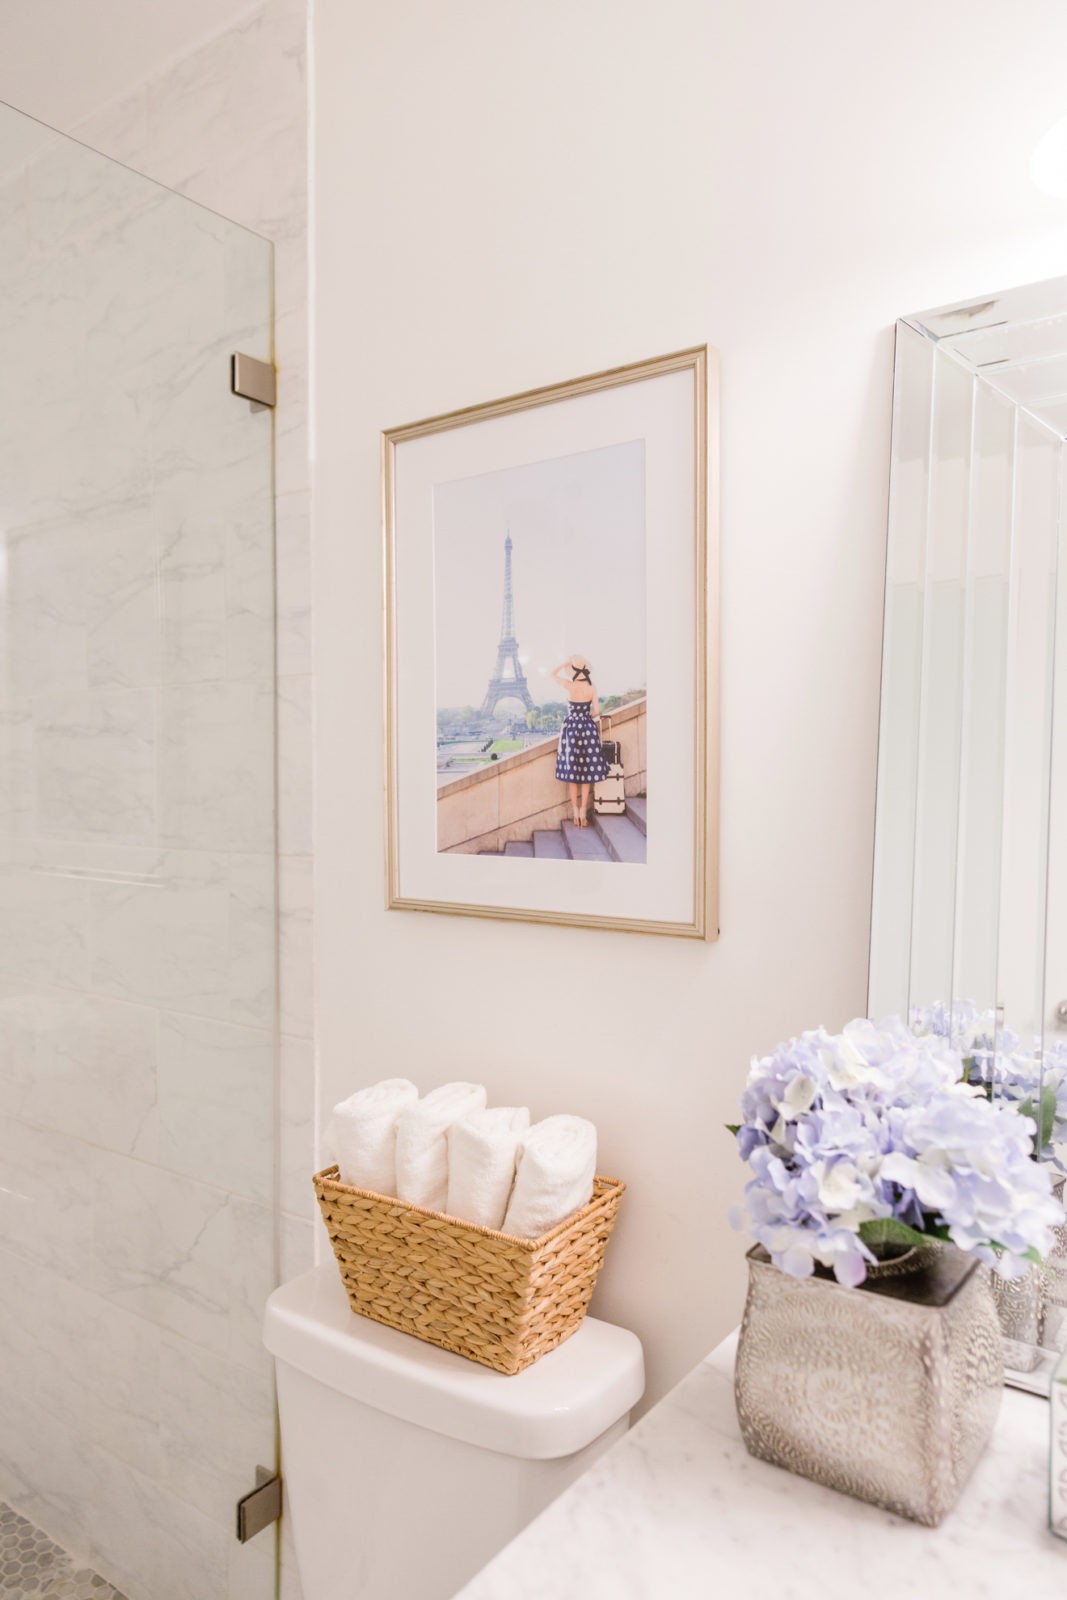 Modern Bathroom Remodel Ideas + Reveal featured by popular US lifestyle blogger, Laura Lily: image of after photo of modern bathroom remodel framebridge photo, metal vase with flowers, and wicker basket holding rolled up white hand towels. 